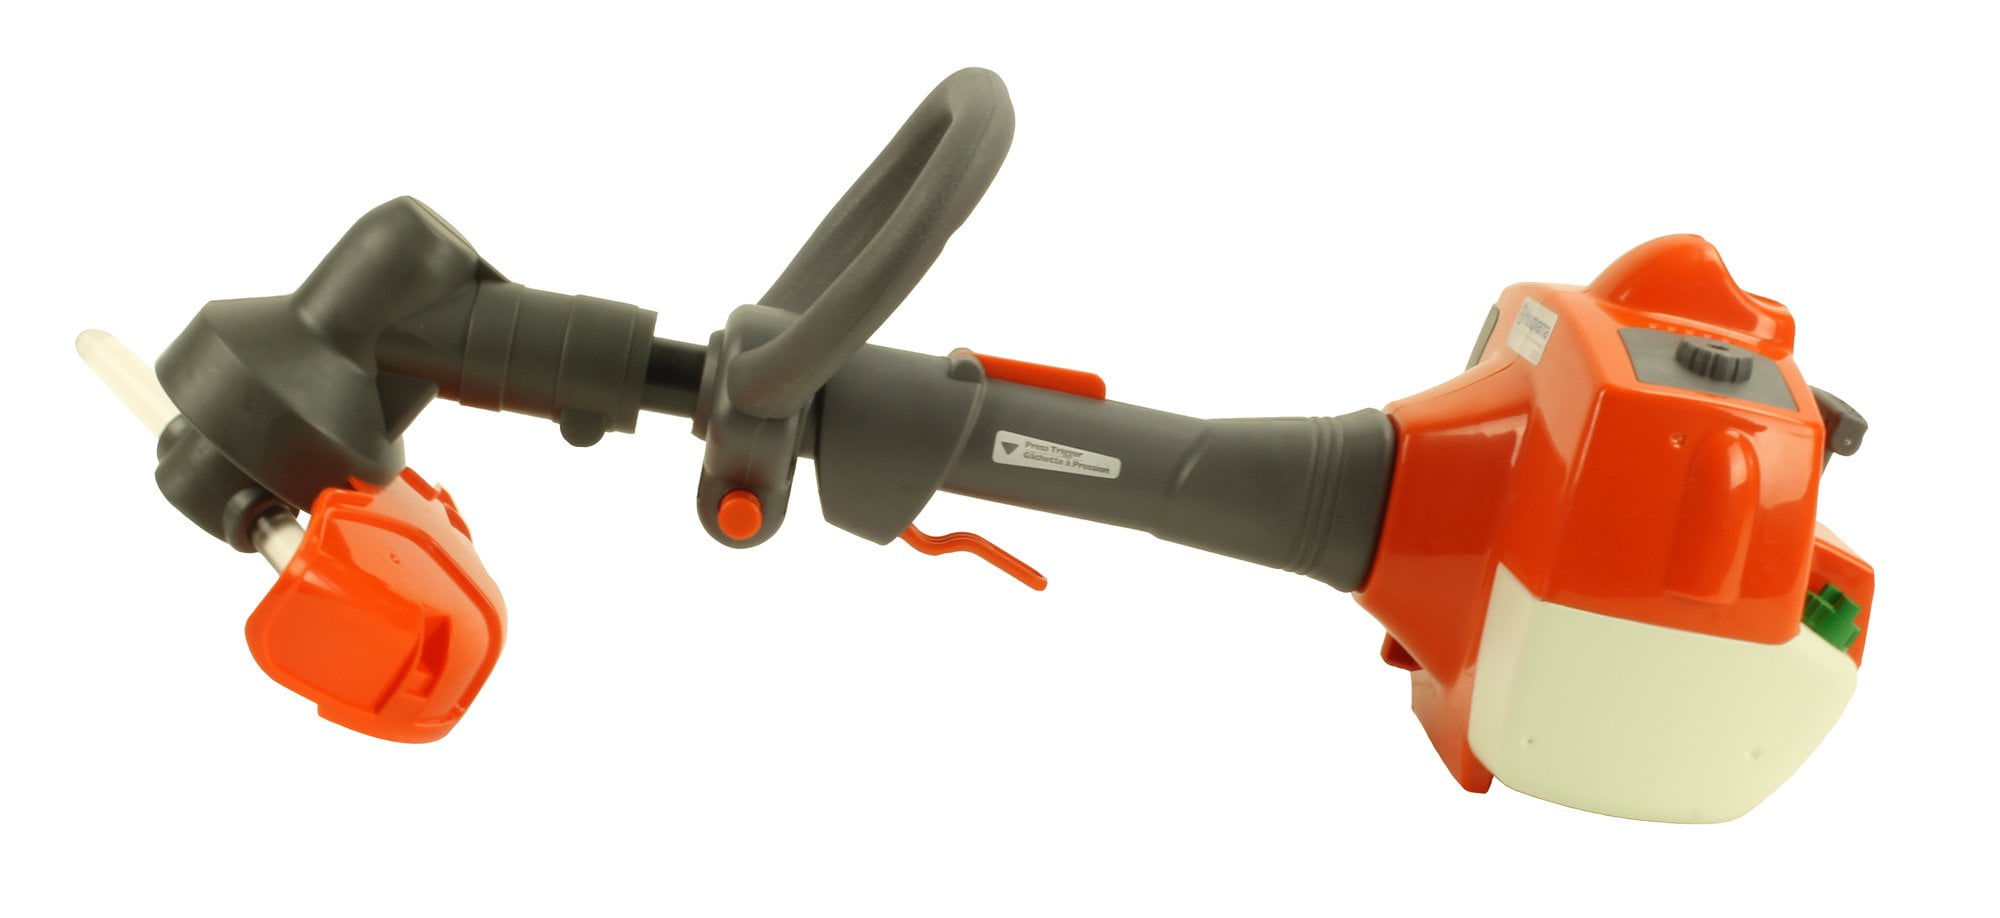 husqvarna cordless weed trimmers